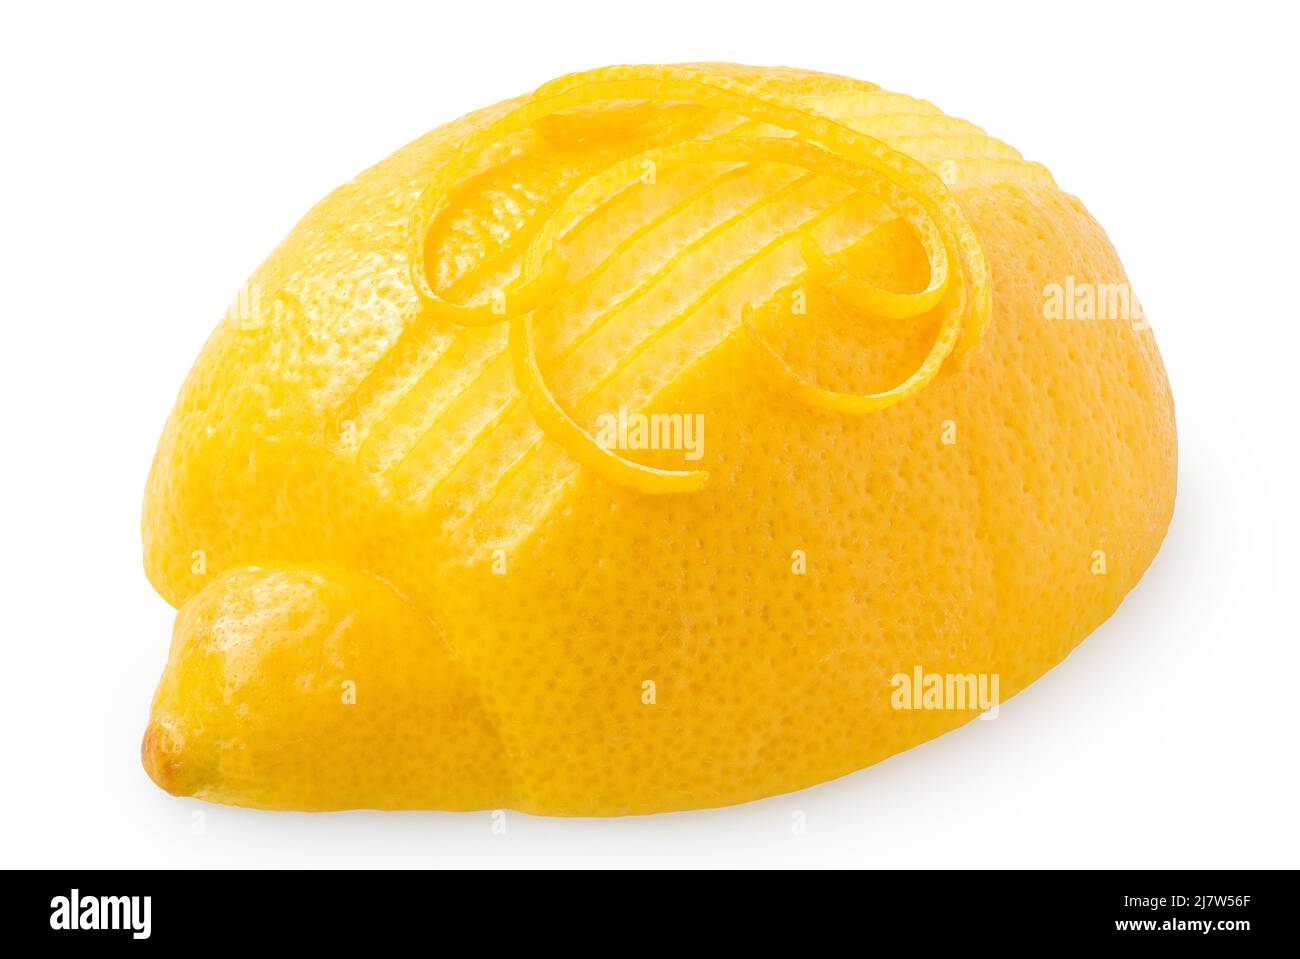 Partially peeled half of lemon with strips of lemon zest on top isolated on white. Stock Photo